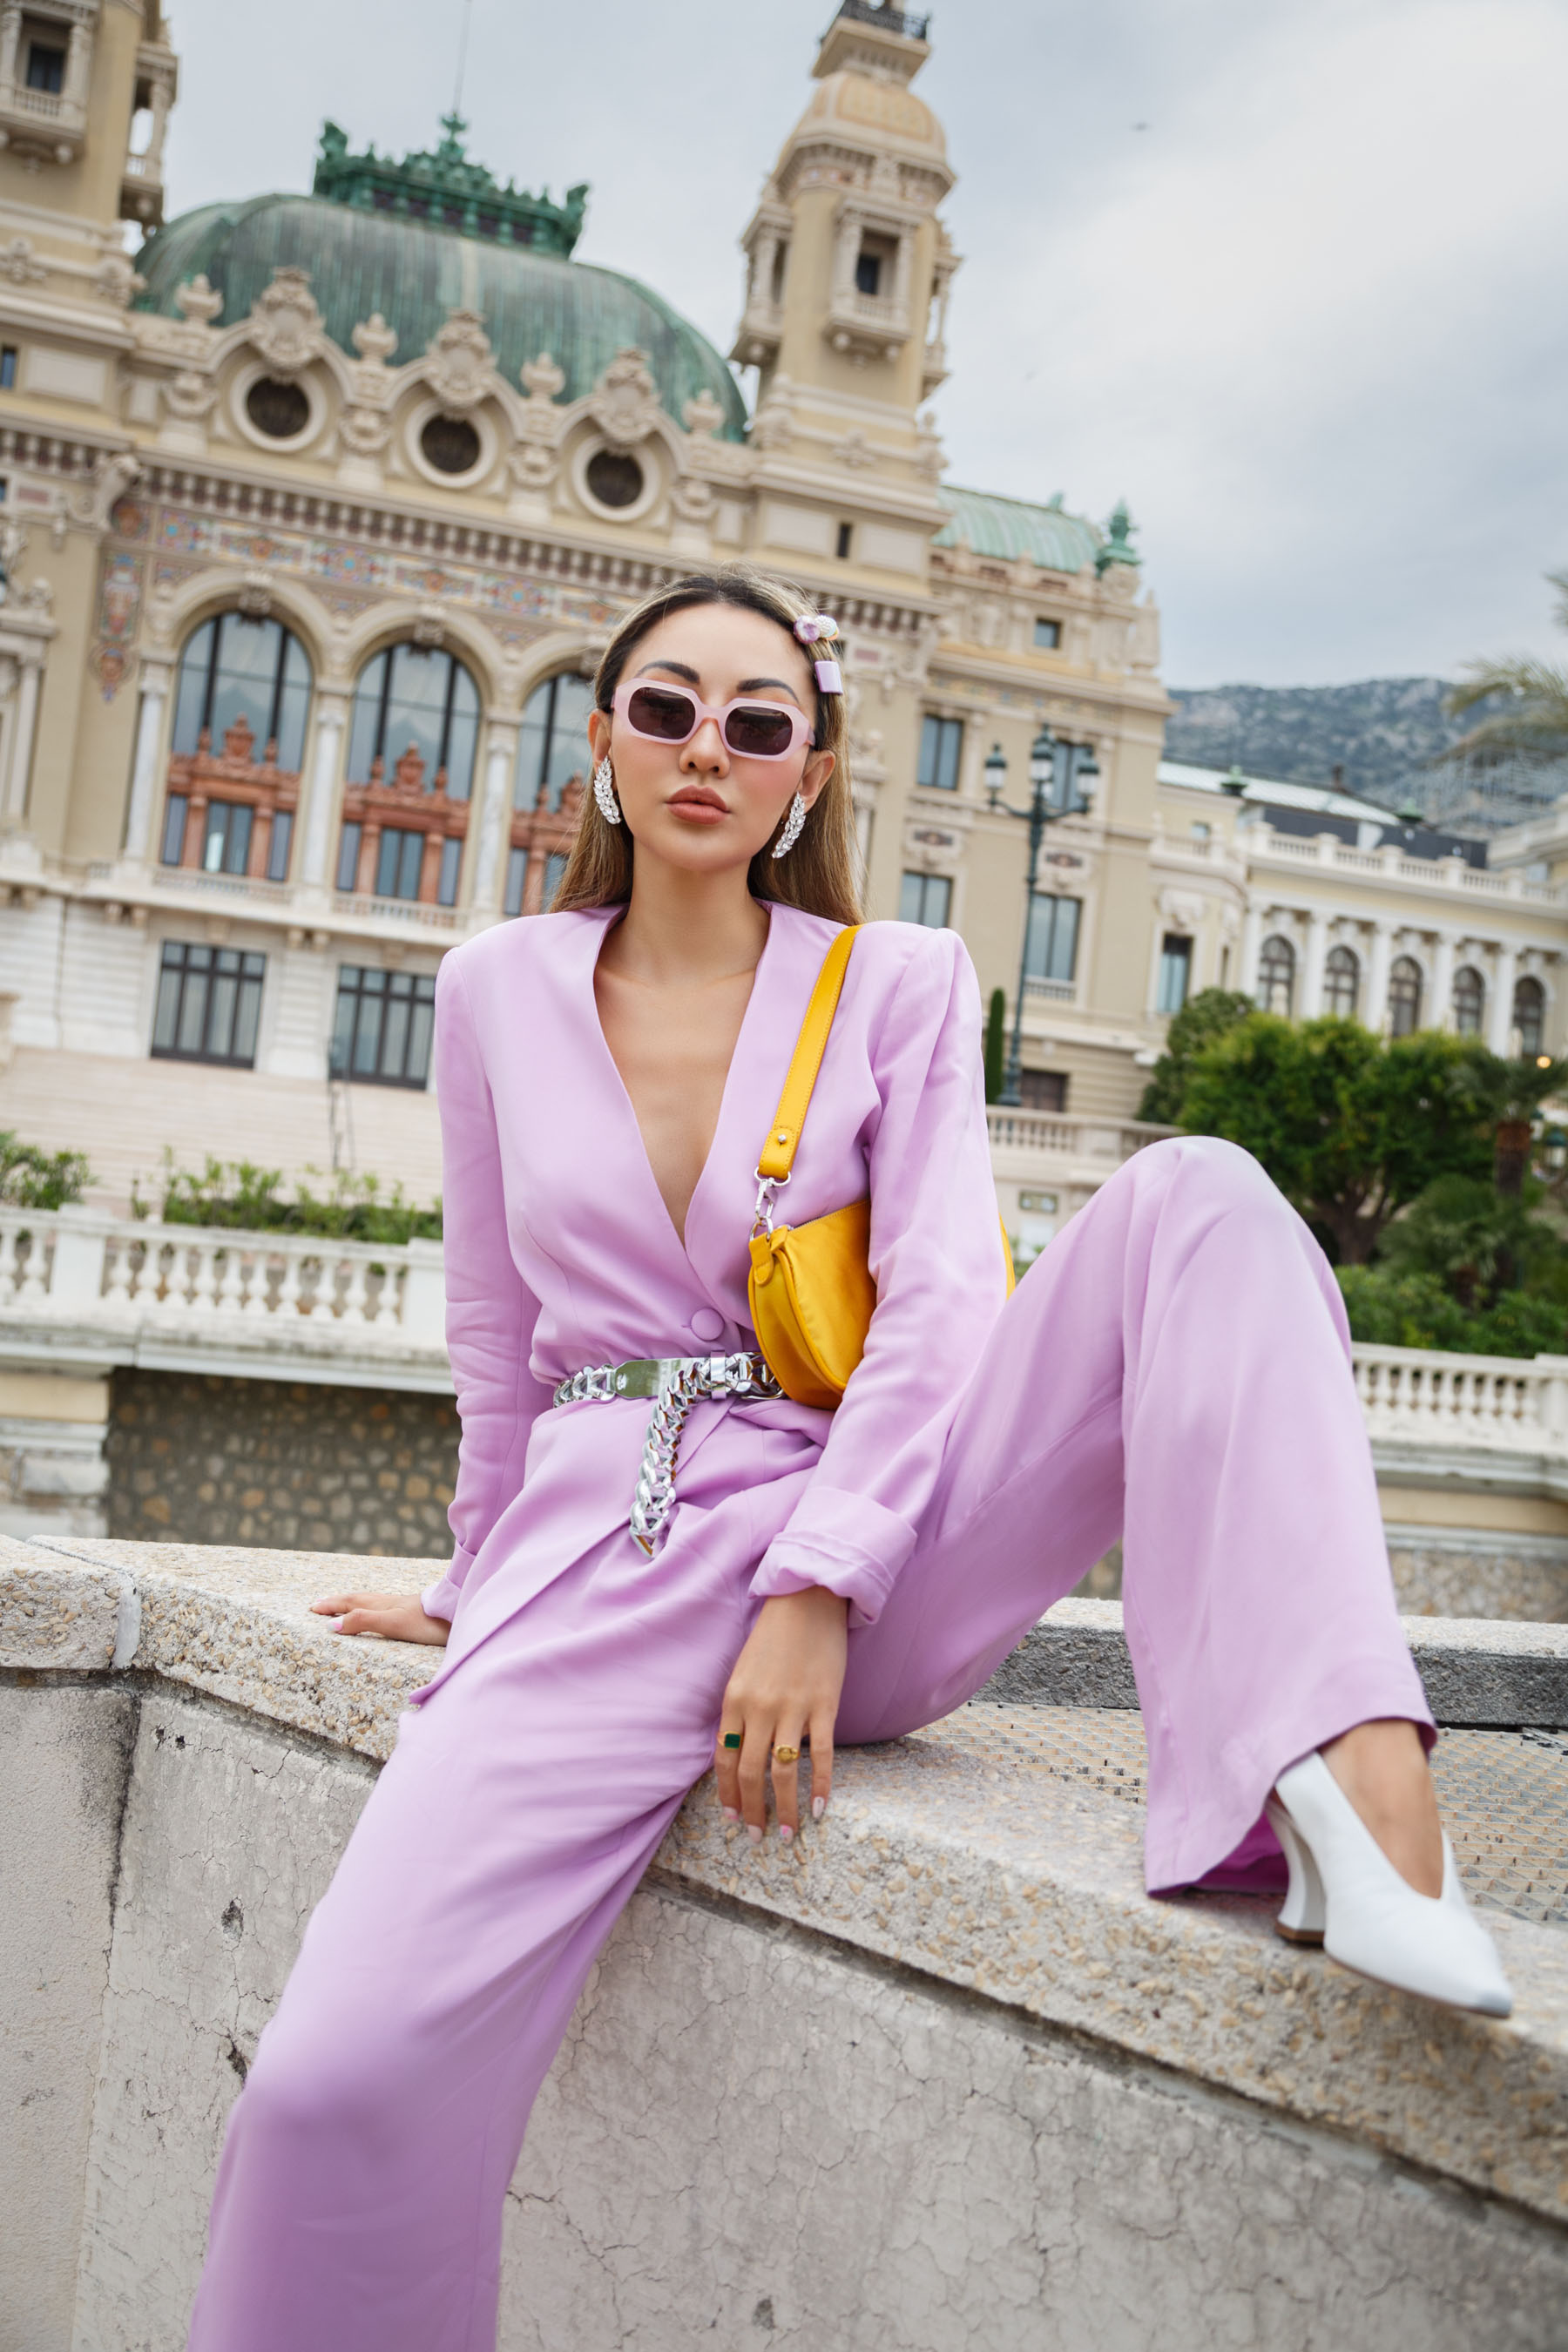 summer trends to retire, white sunglasses, lavender suit, hair pins hairstyle // Notjessfashion.com